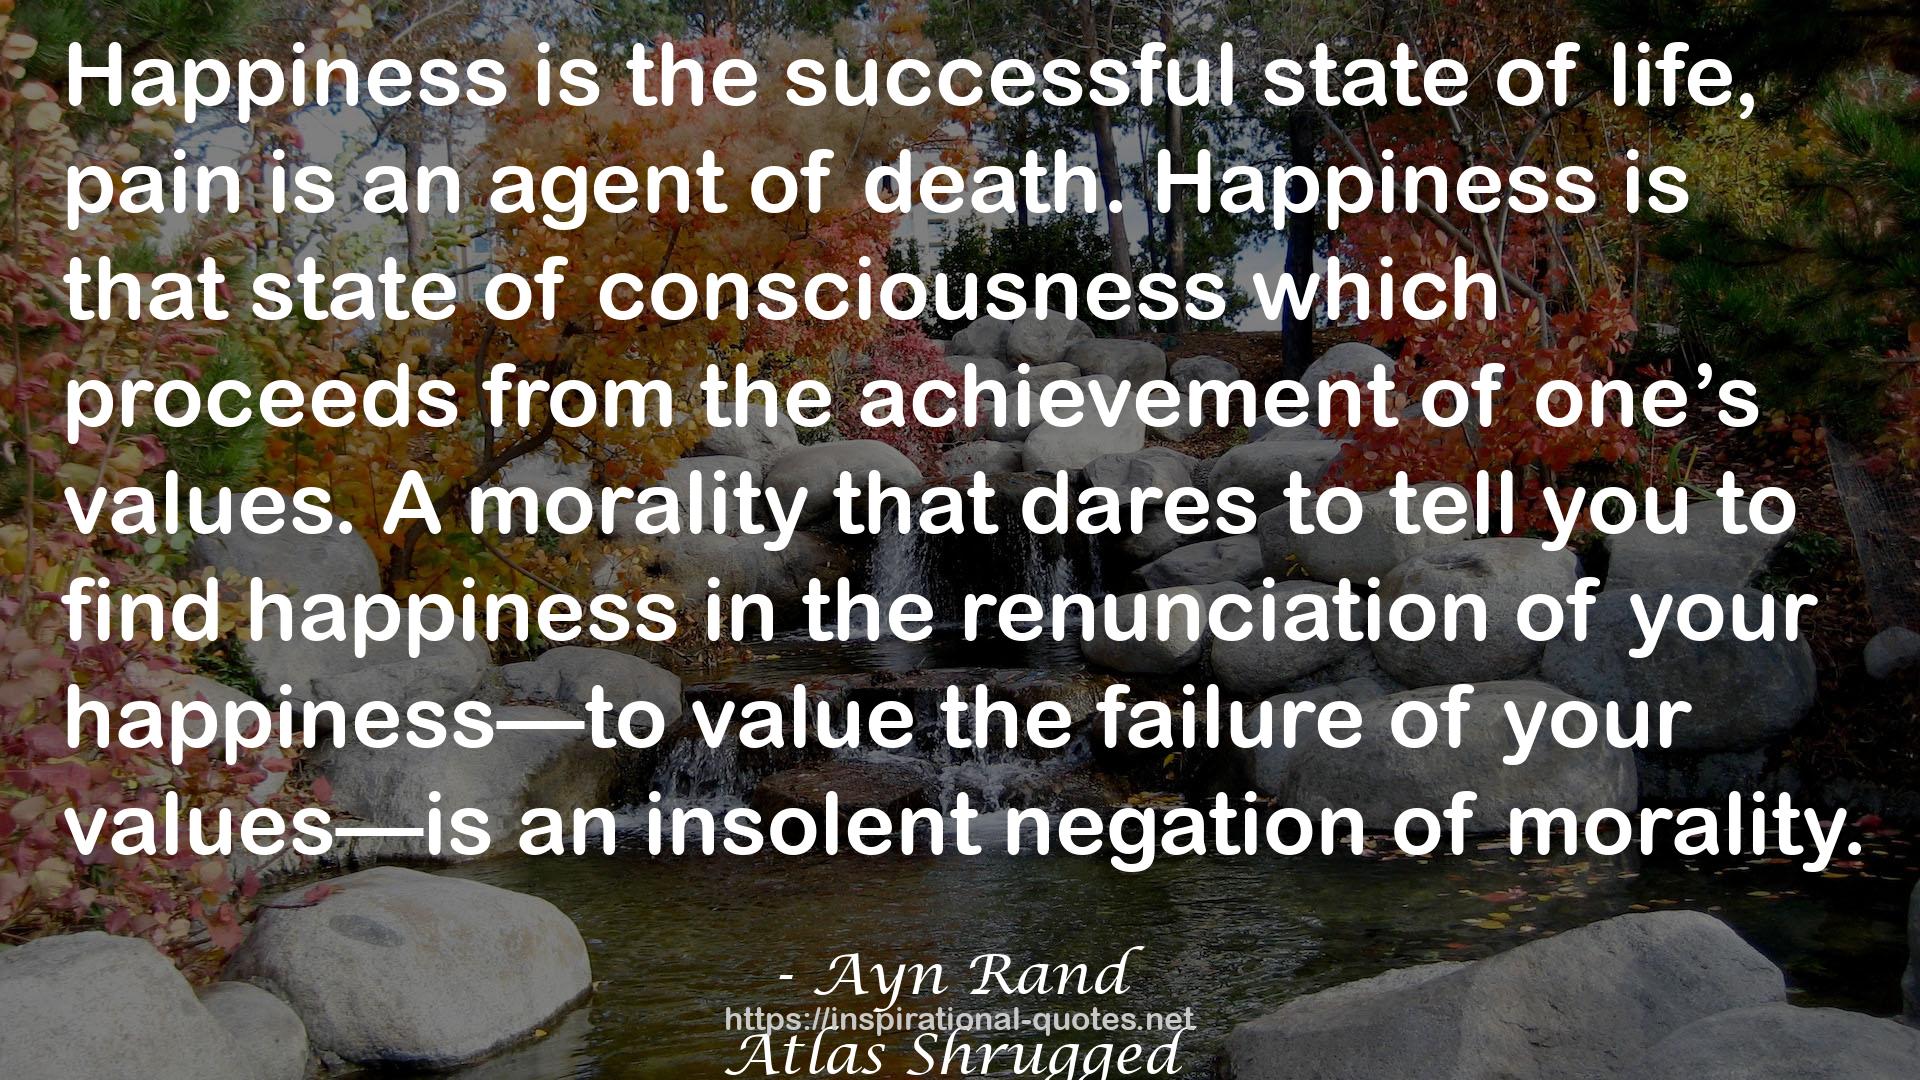 Ayn Rand QUOTES